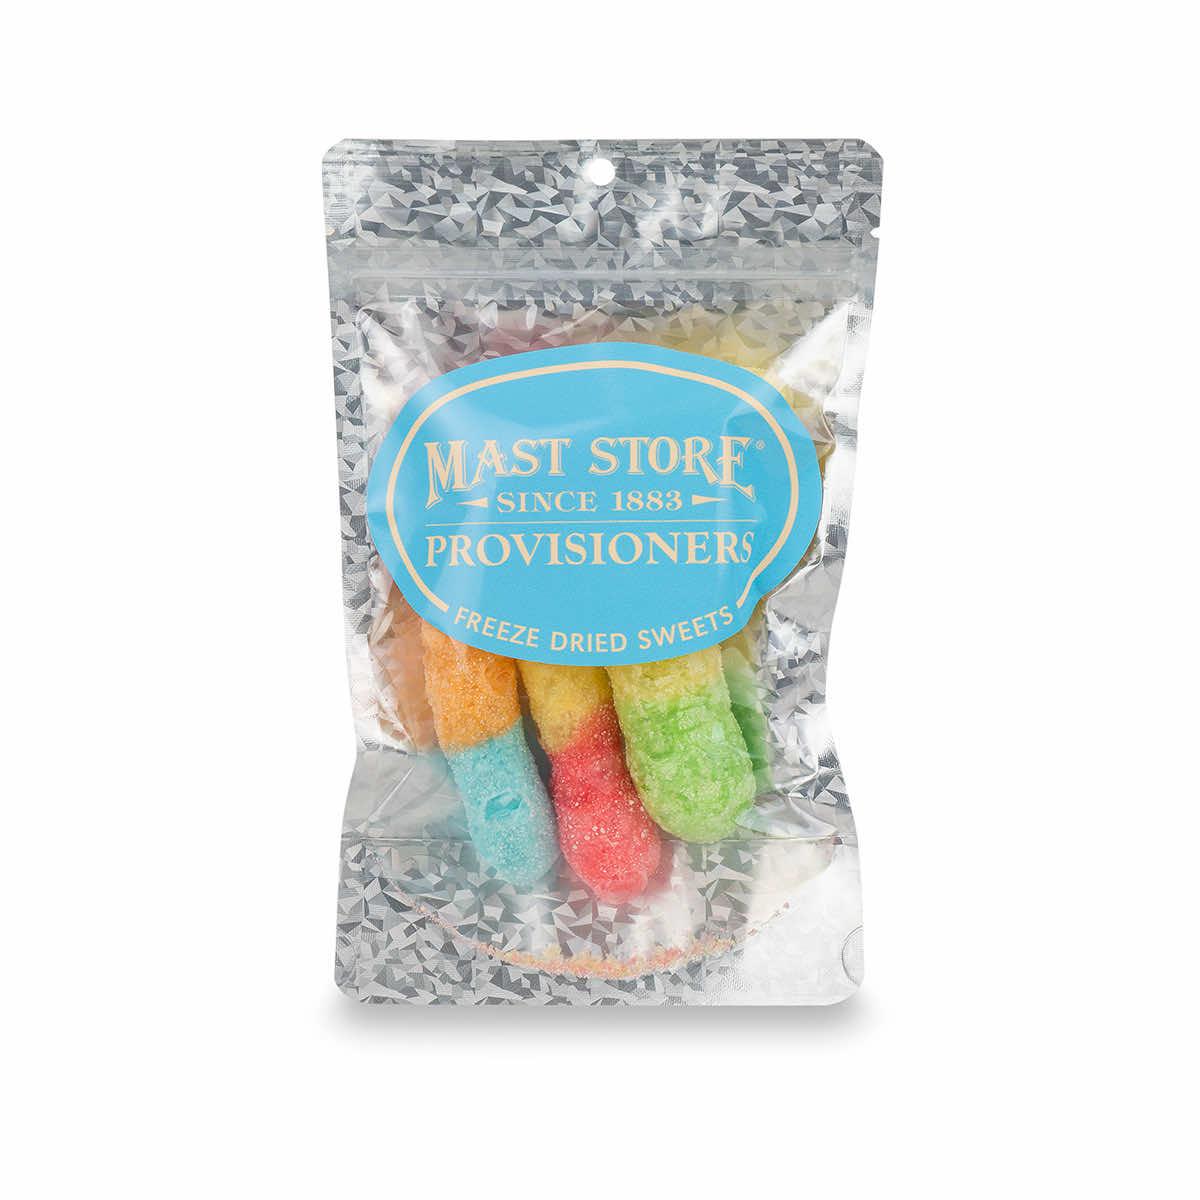  Mast Store Provisioners Freeze Dried Sour Gummi Worms Candy